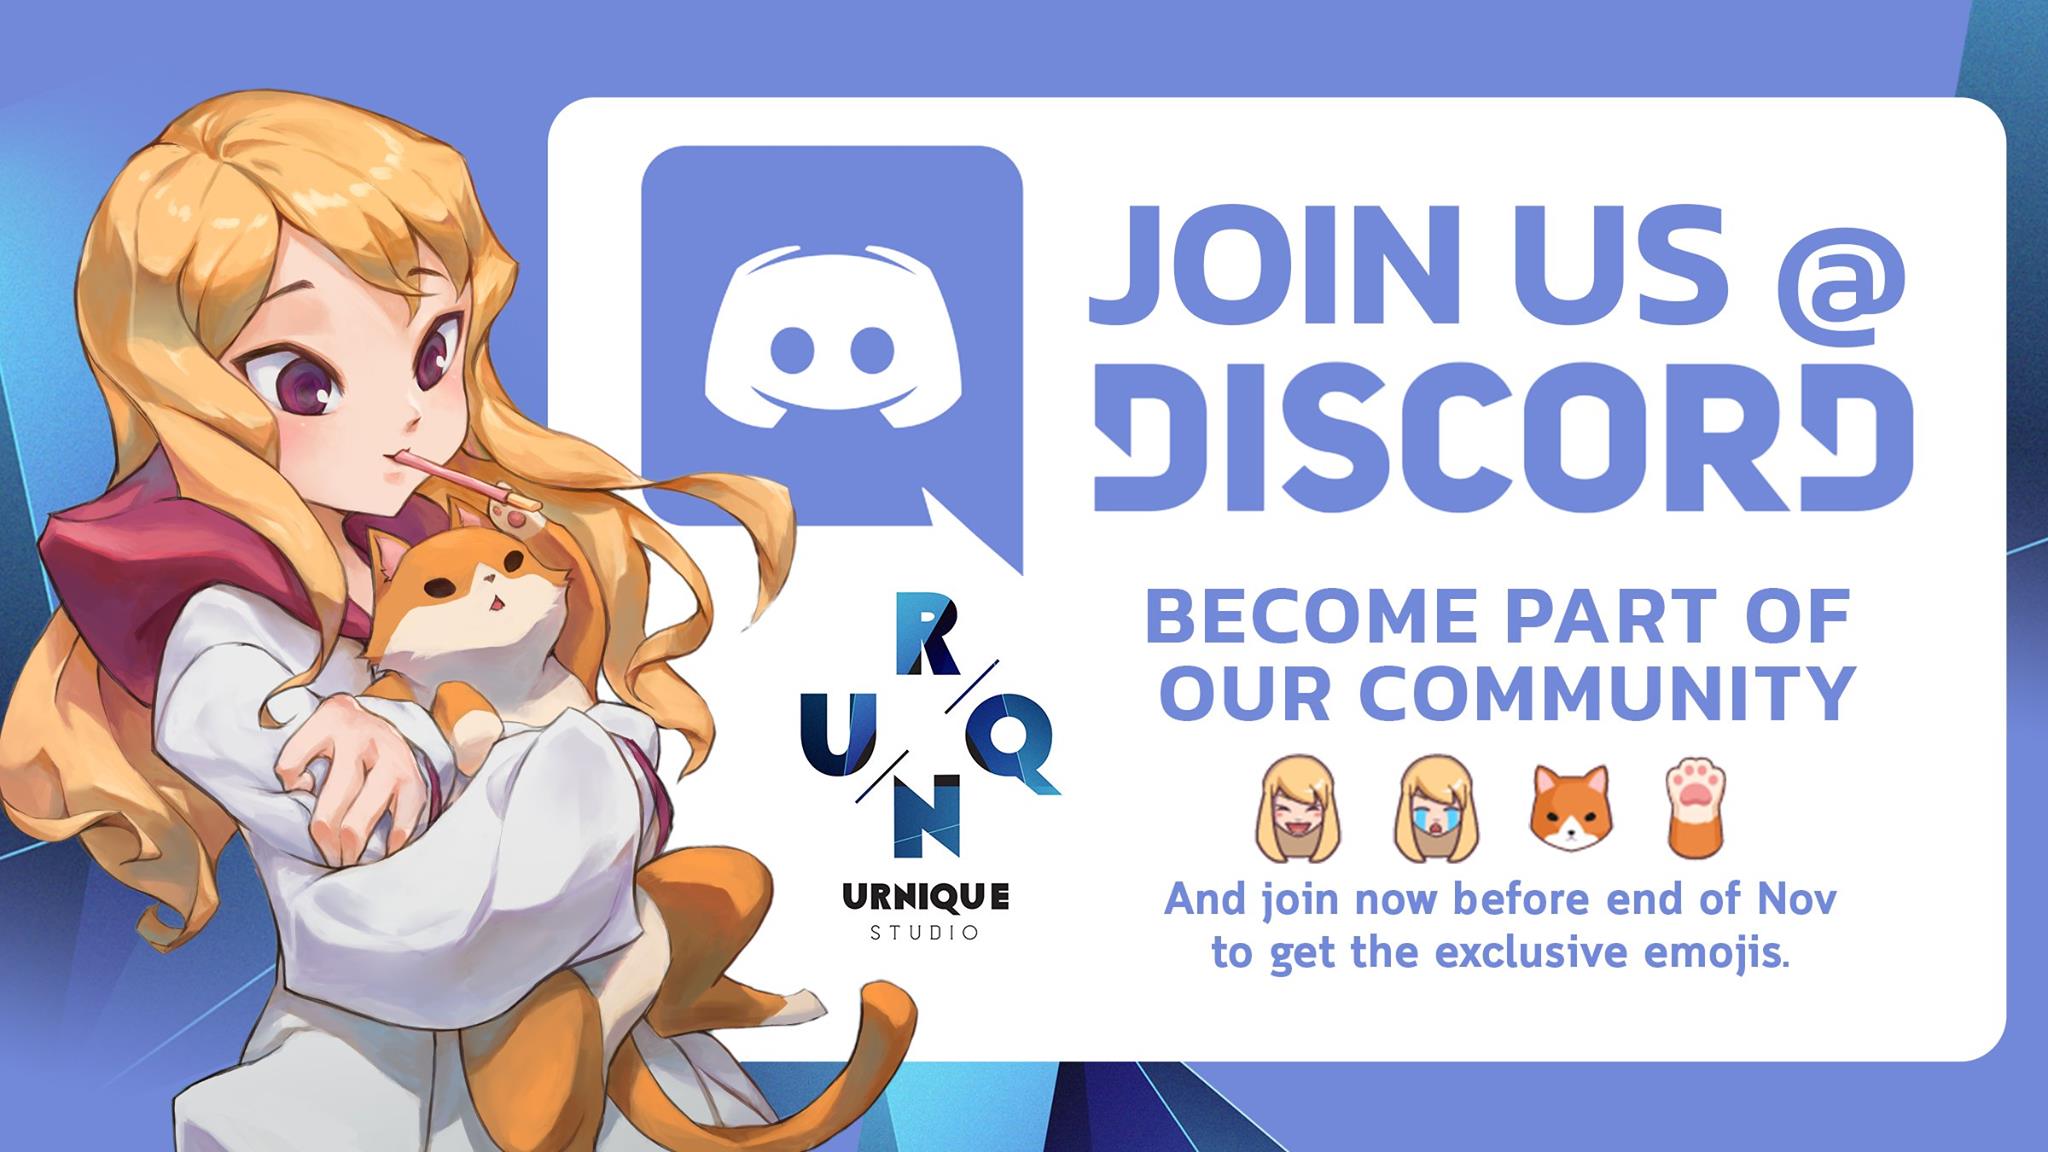 Join the ｡˚ଘ emcee's cakery ､､꒷꒦ Discord Server!